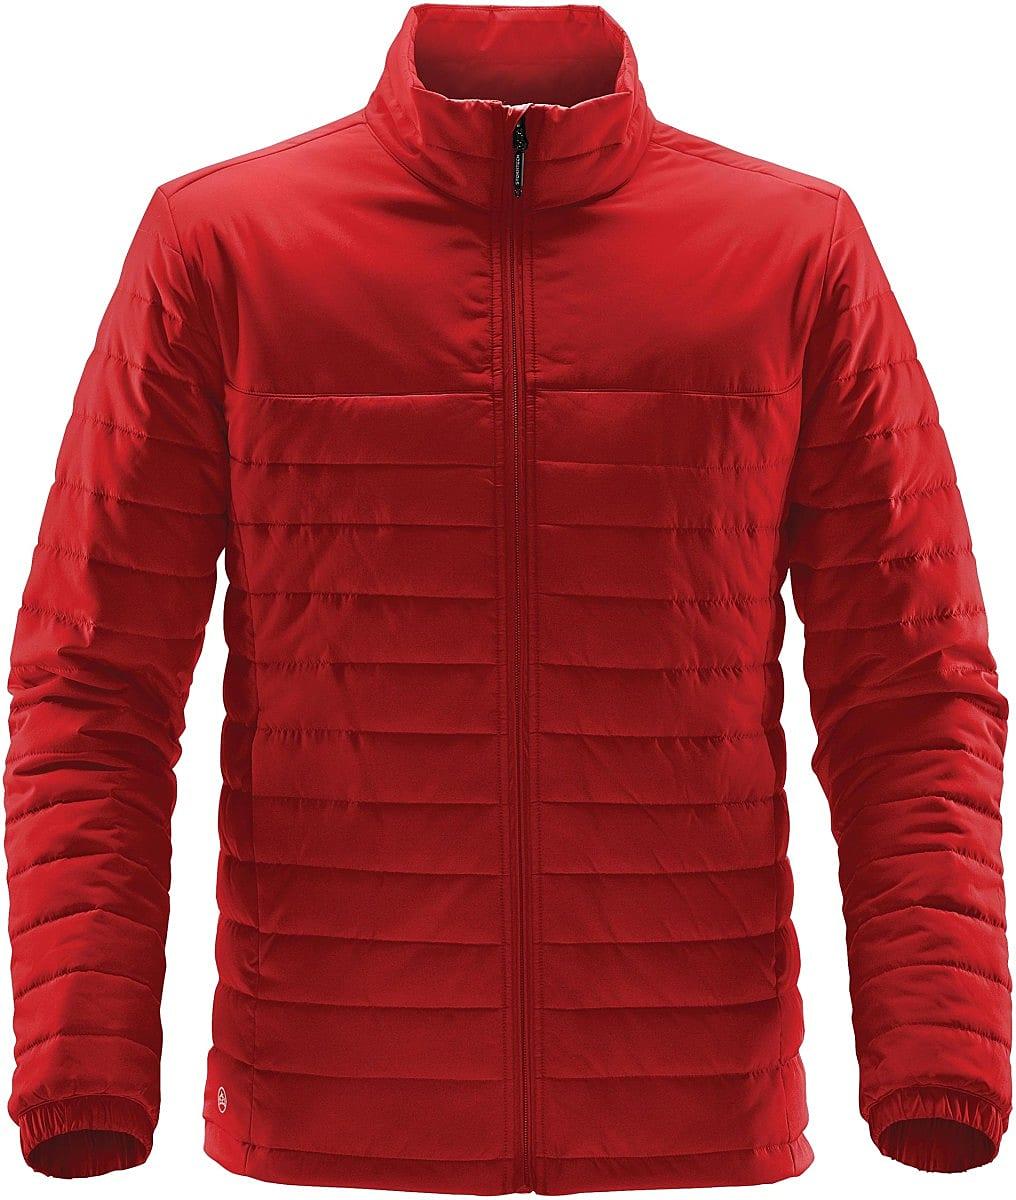 Stormtech Mens Nautilus Jacket in Bright Red (Product Code: QX-1)